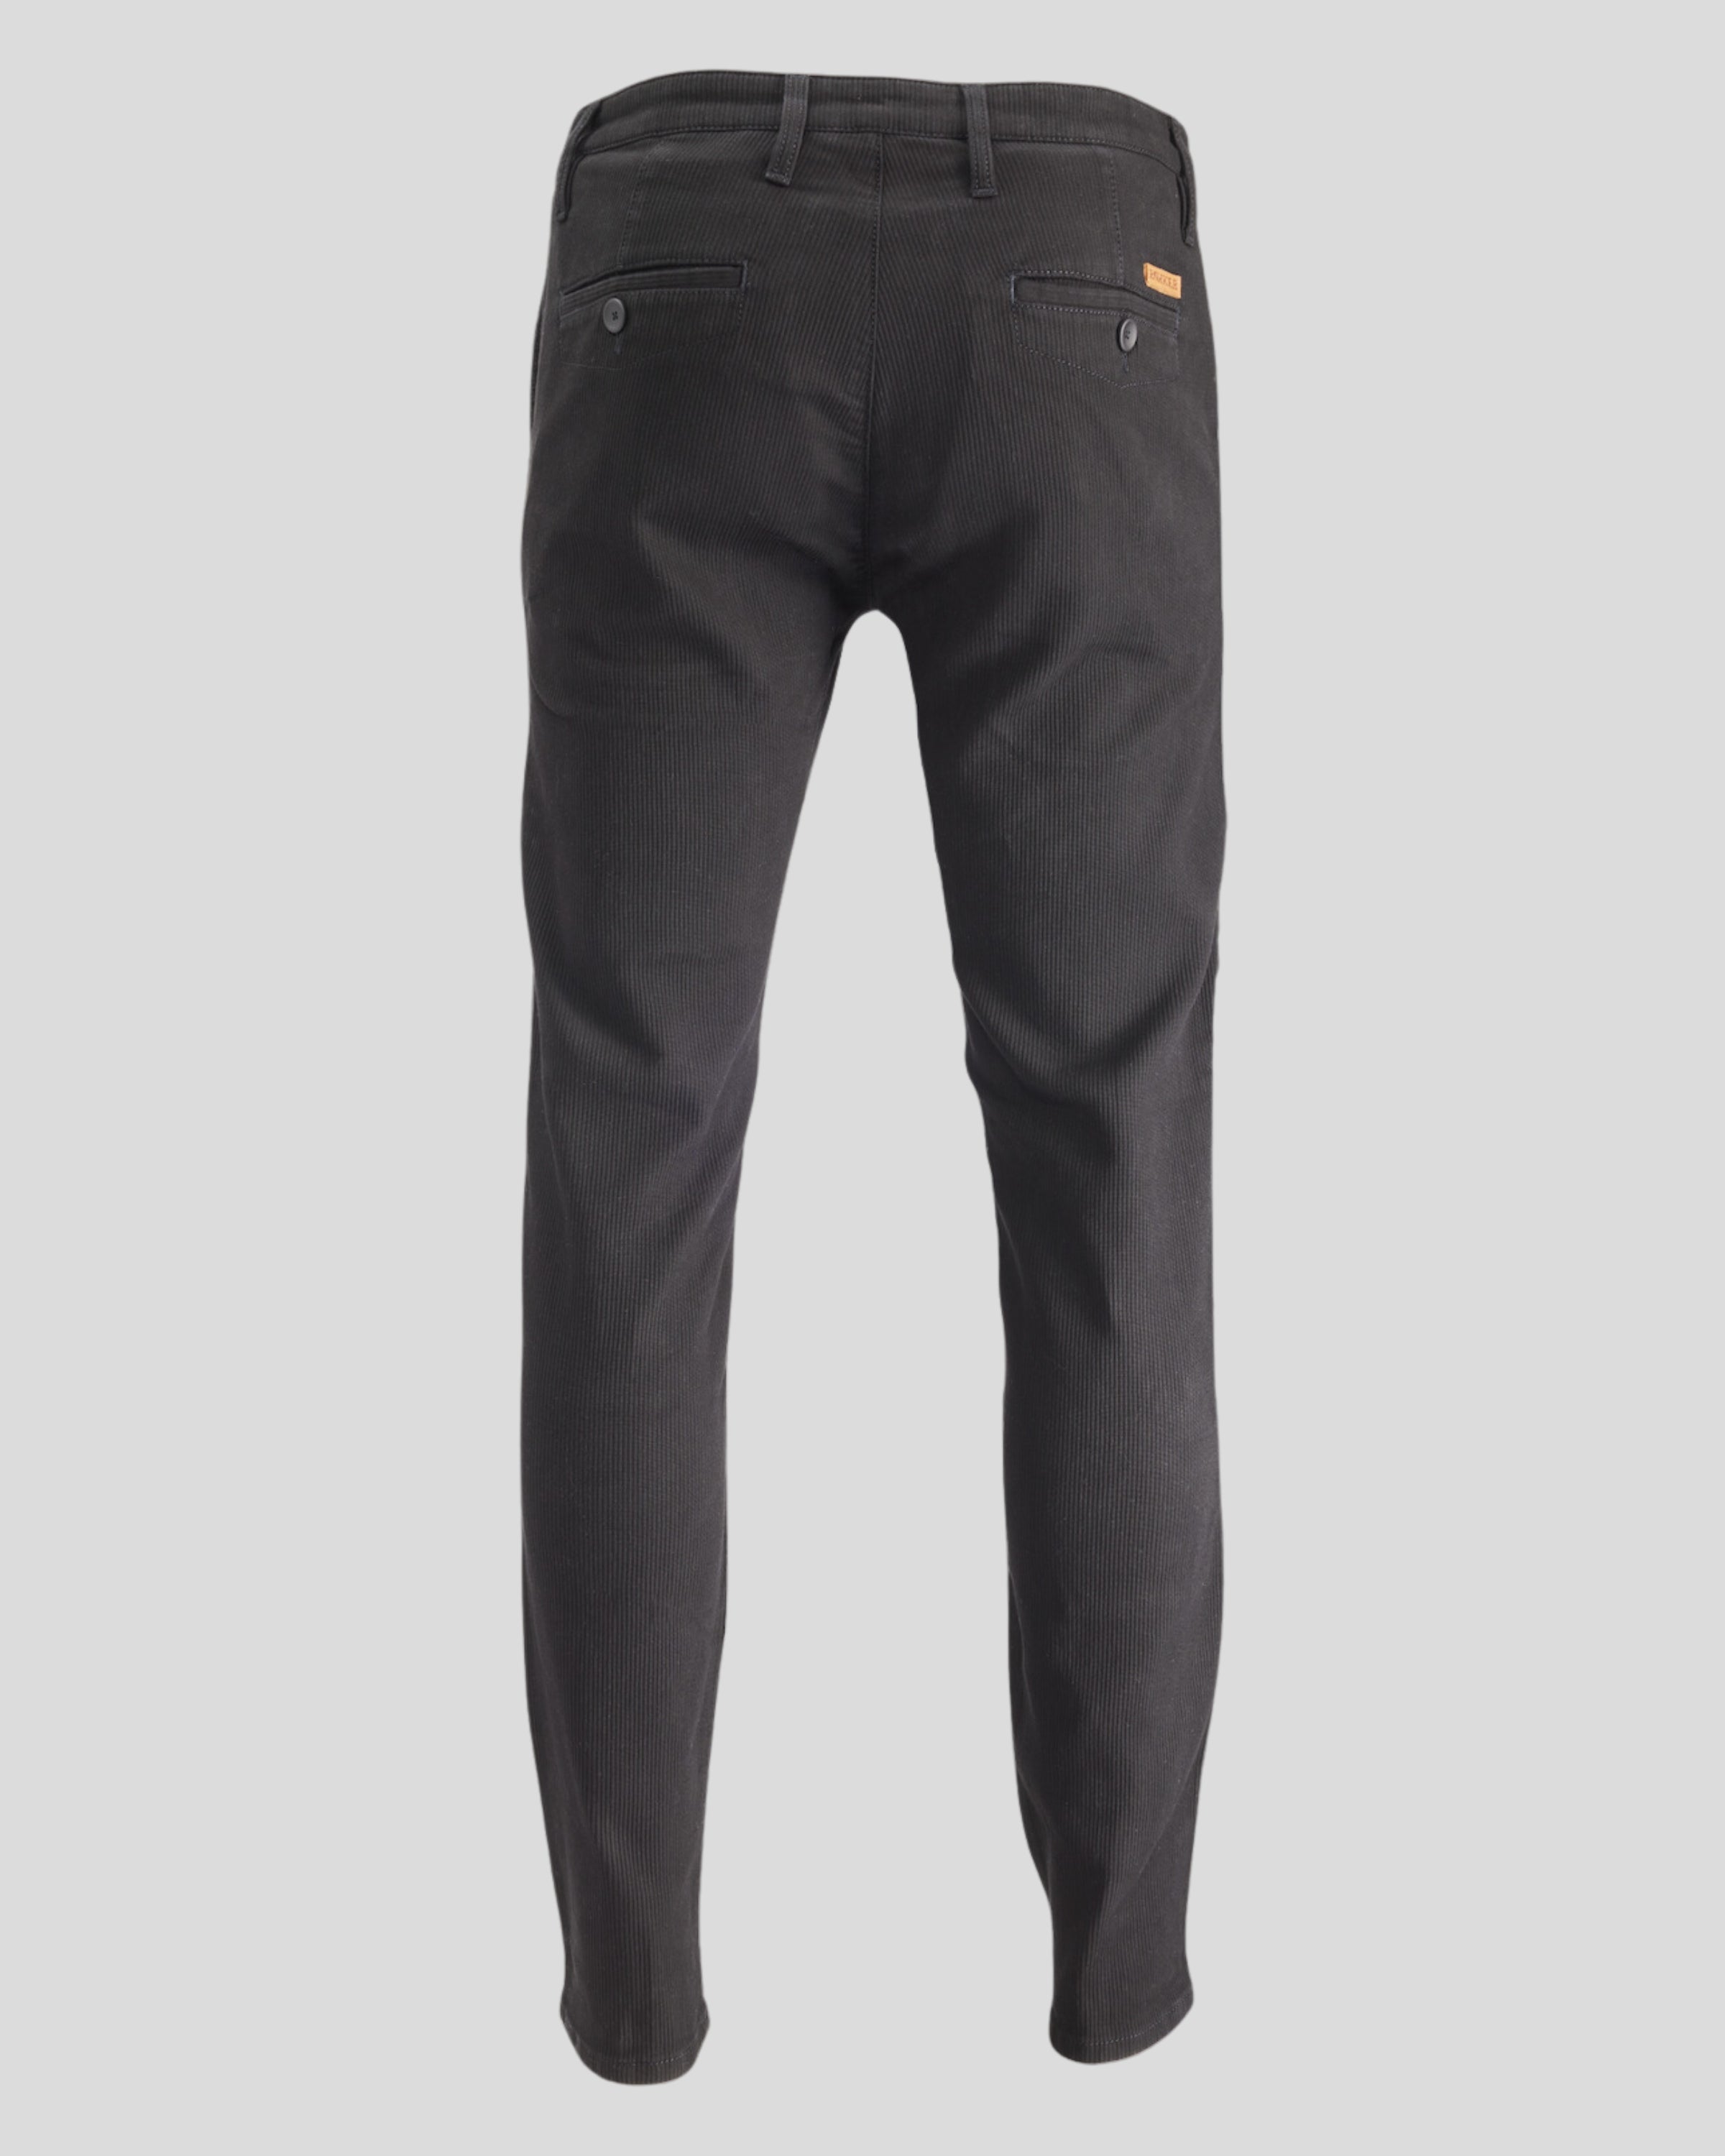 Men's motorcycle trousers by ROKKER ▻ Top quality + top styles